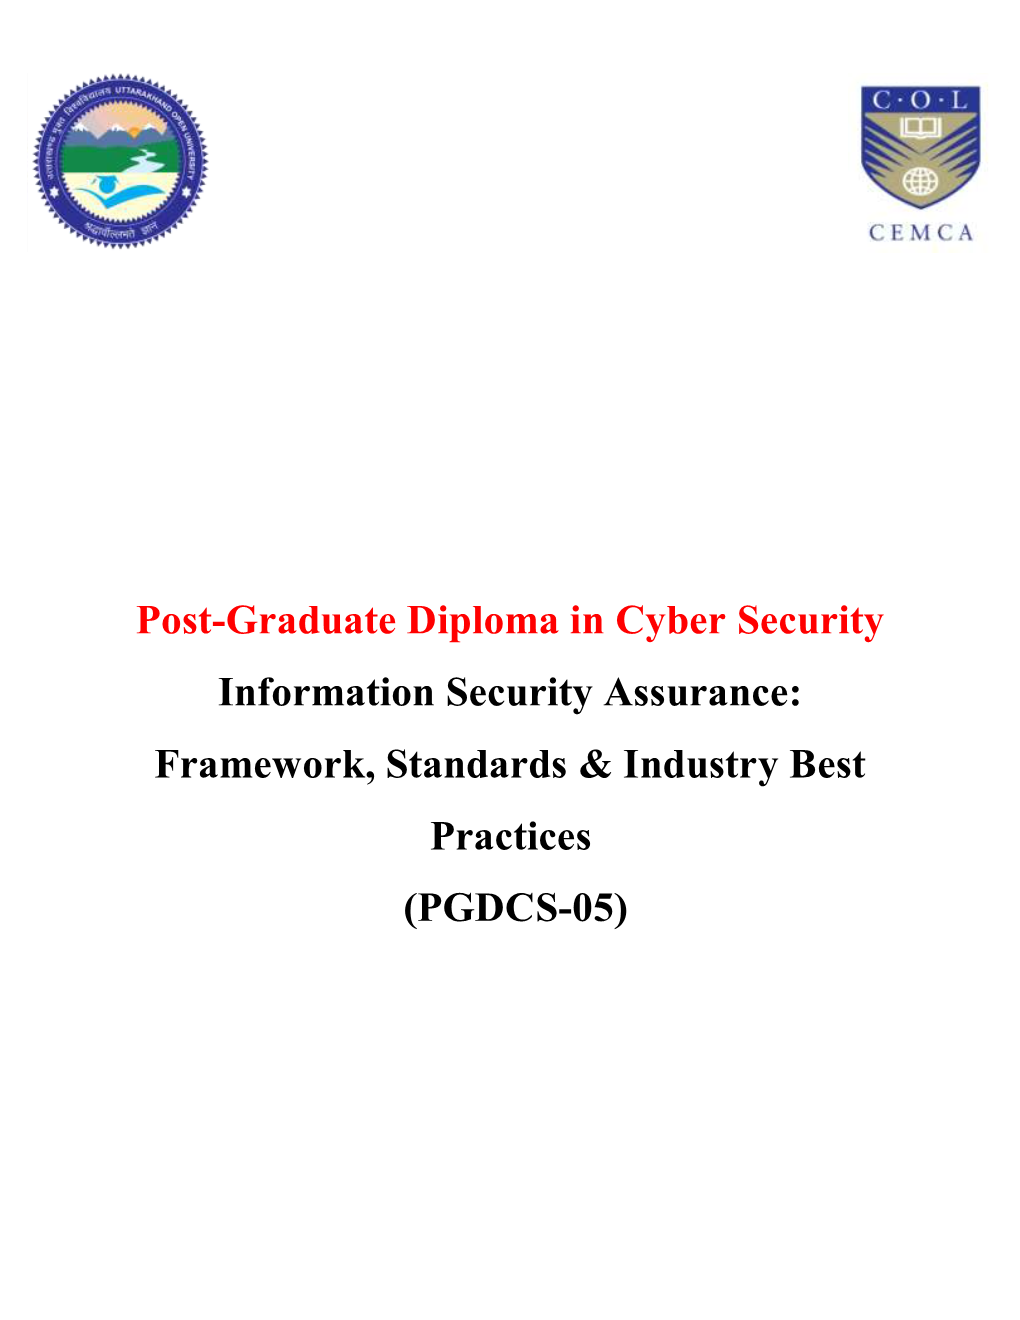 Post-Graduate Diploma in Cyber Security Information Security Assurance: Framework, Standards & Industry Best Practices (PGDCS-05)